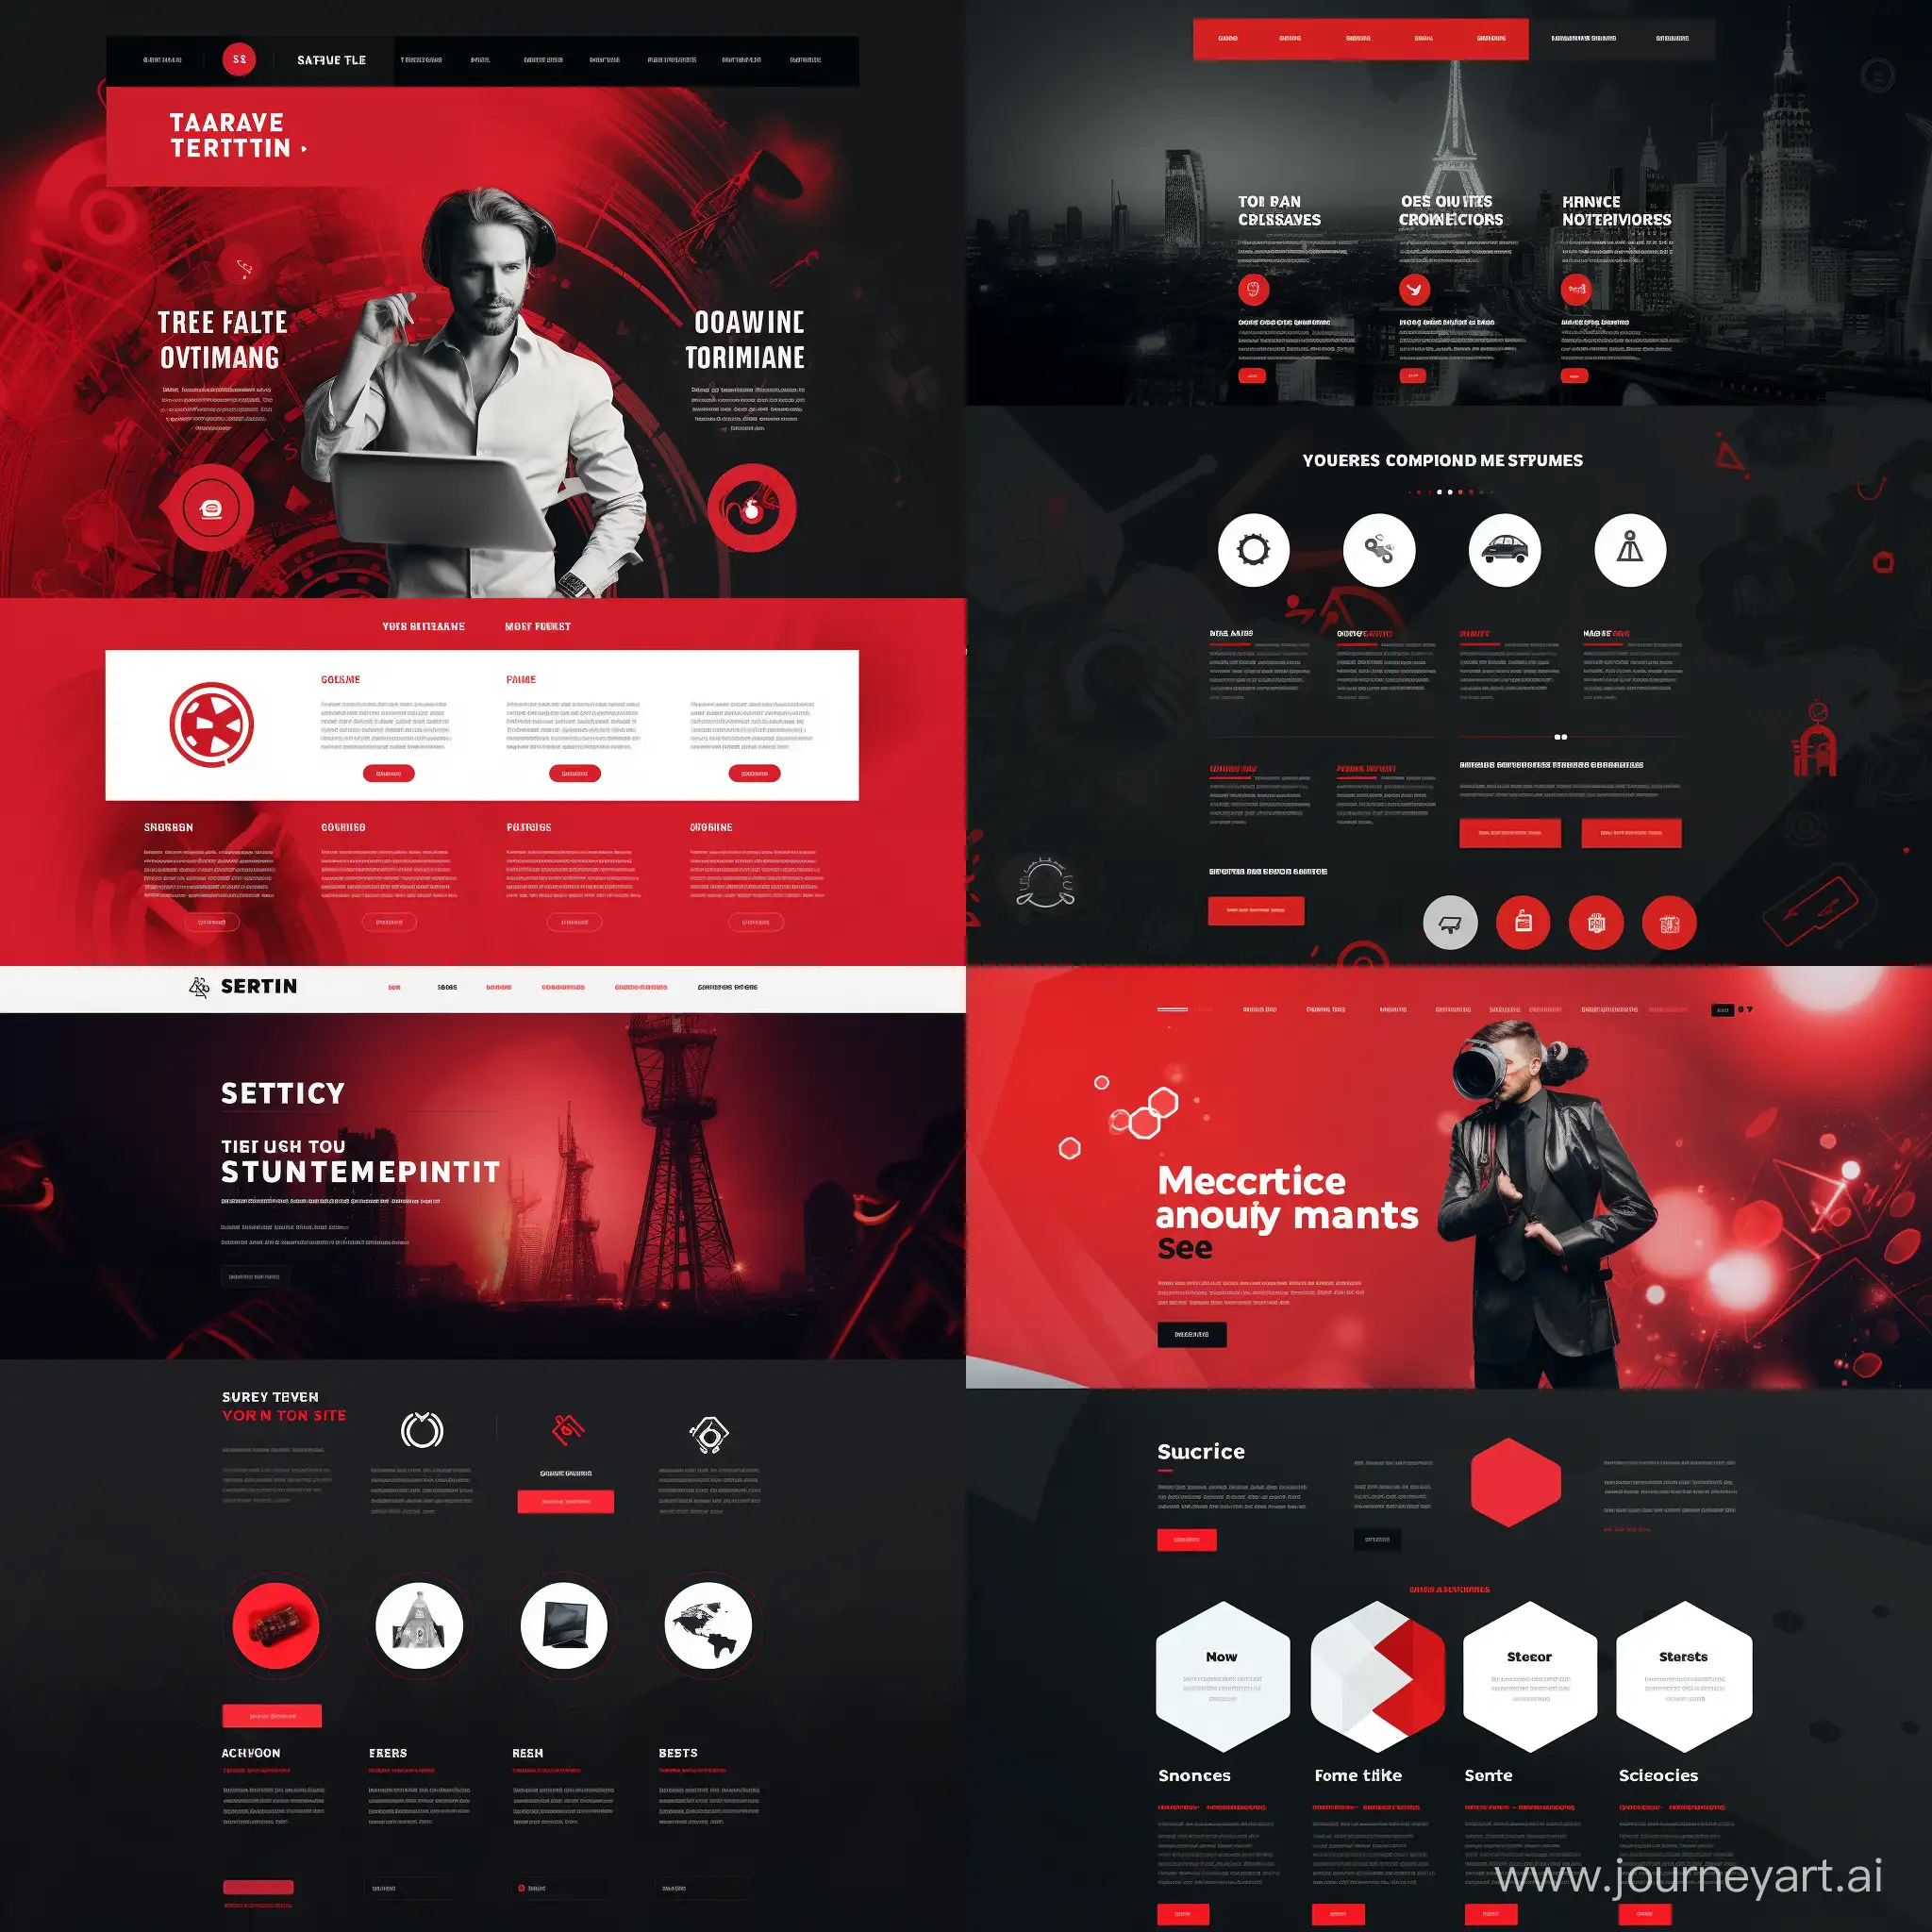 Striking-Red-Black-and-White-UIUX-Design-for-Digital-Marketing-Agency